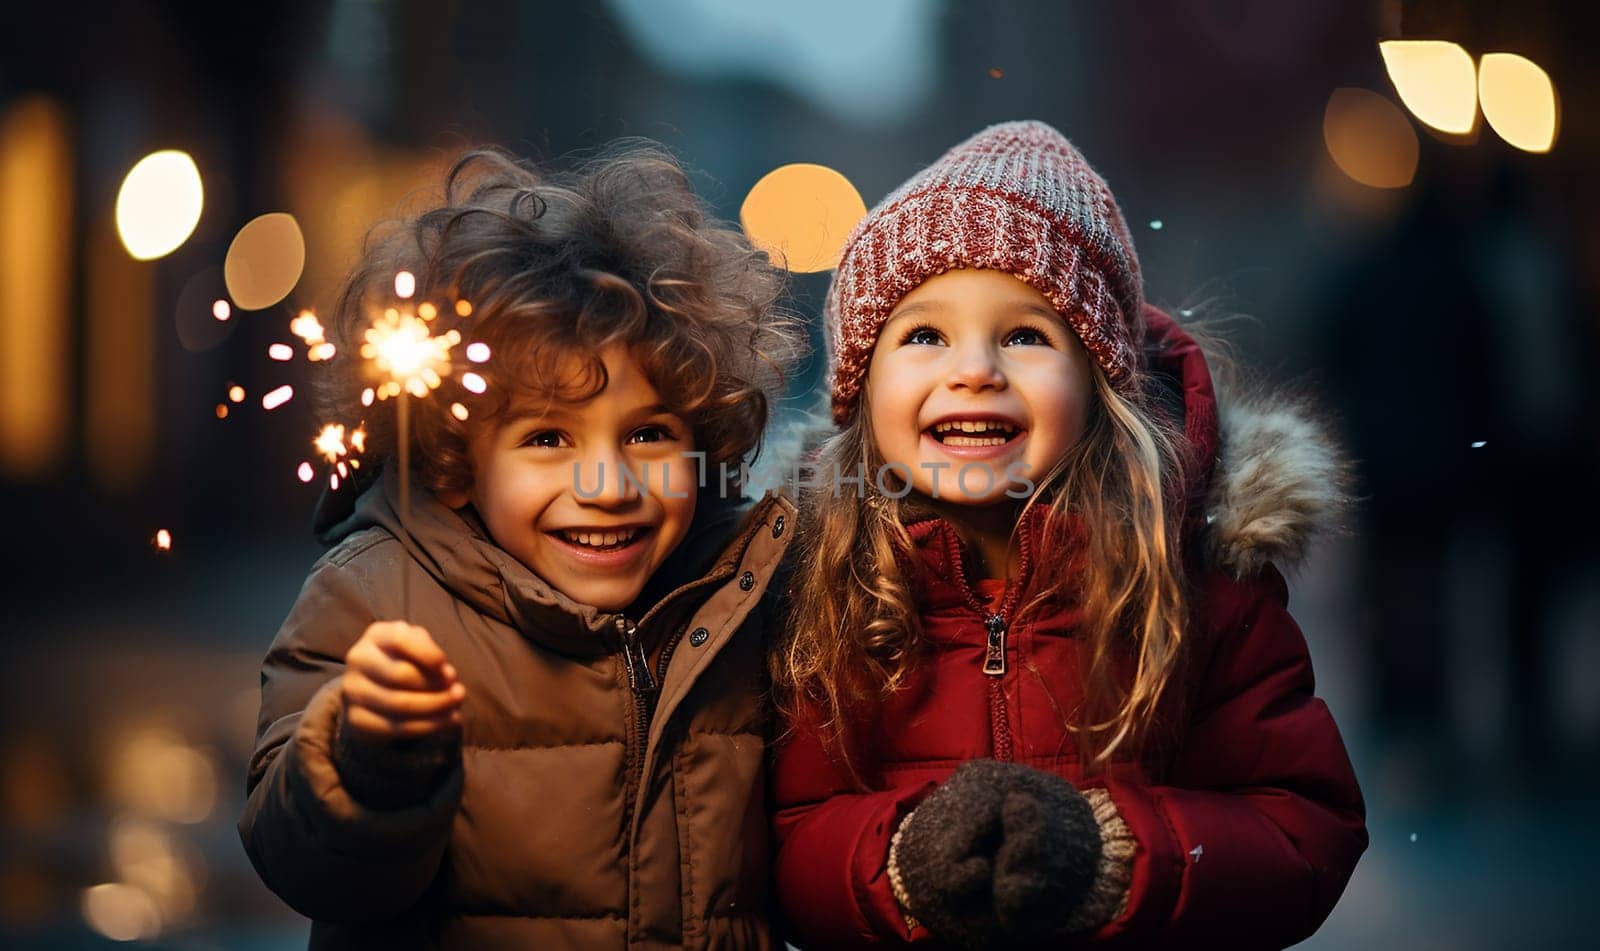 Children with fireworks stick. Holiday dynamic postcard. Happy children holding a lighted fireworks on a blurred background of a bright Christmas garland. Meeting the new year. Christmas evening Happy New Year concept by Annebel146